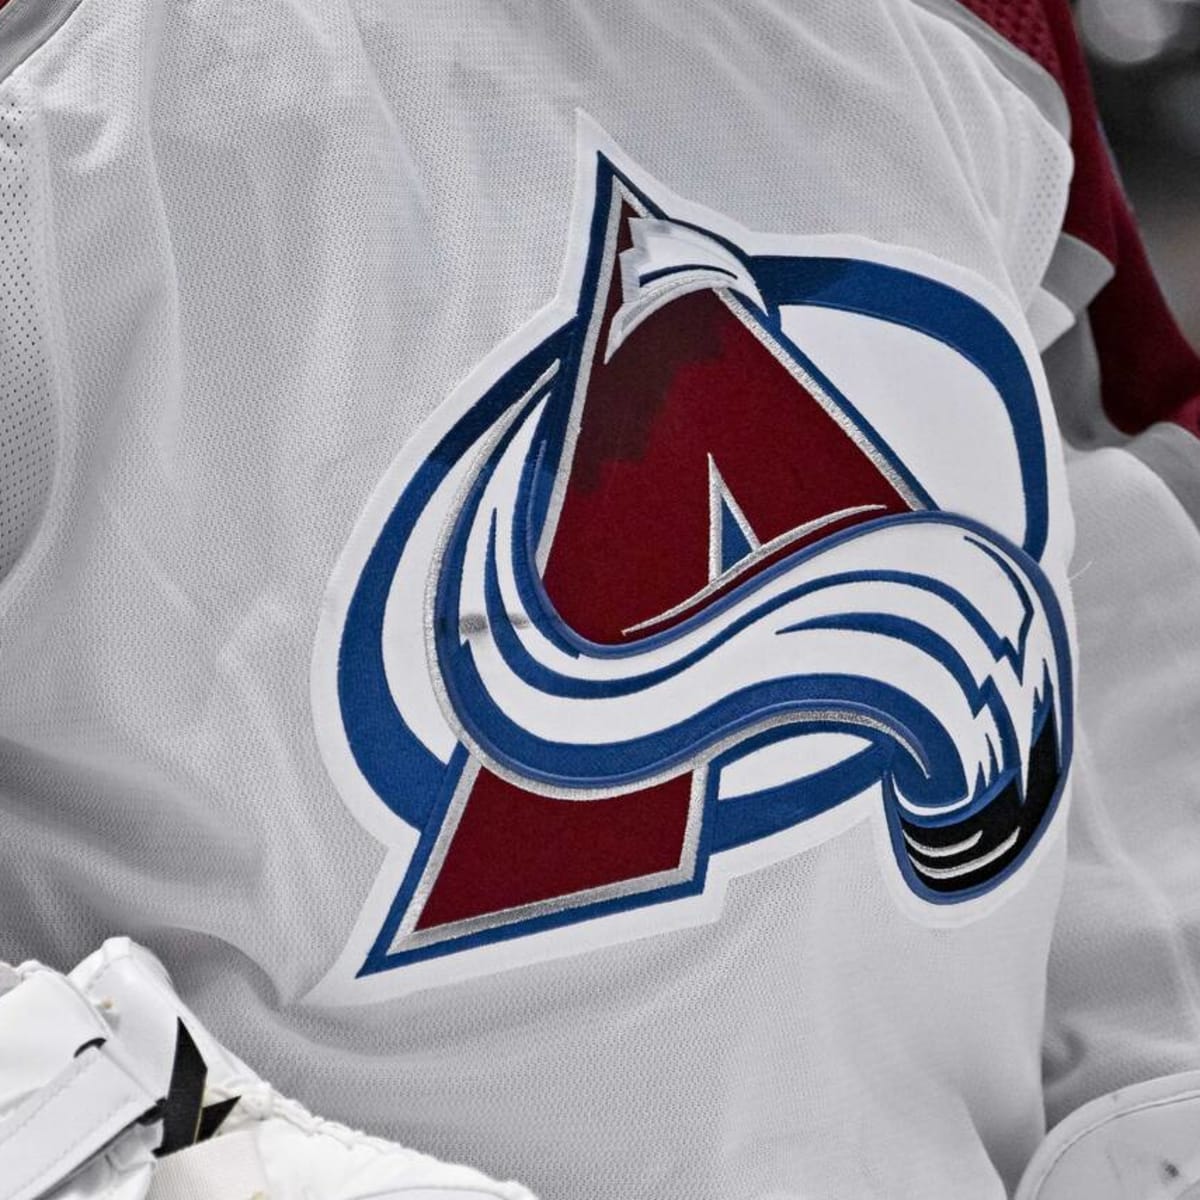 Avalanche unveil 2022 Stanley Cup rings, featuring 669 diamonds